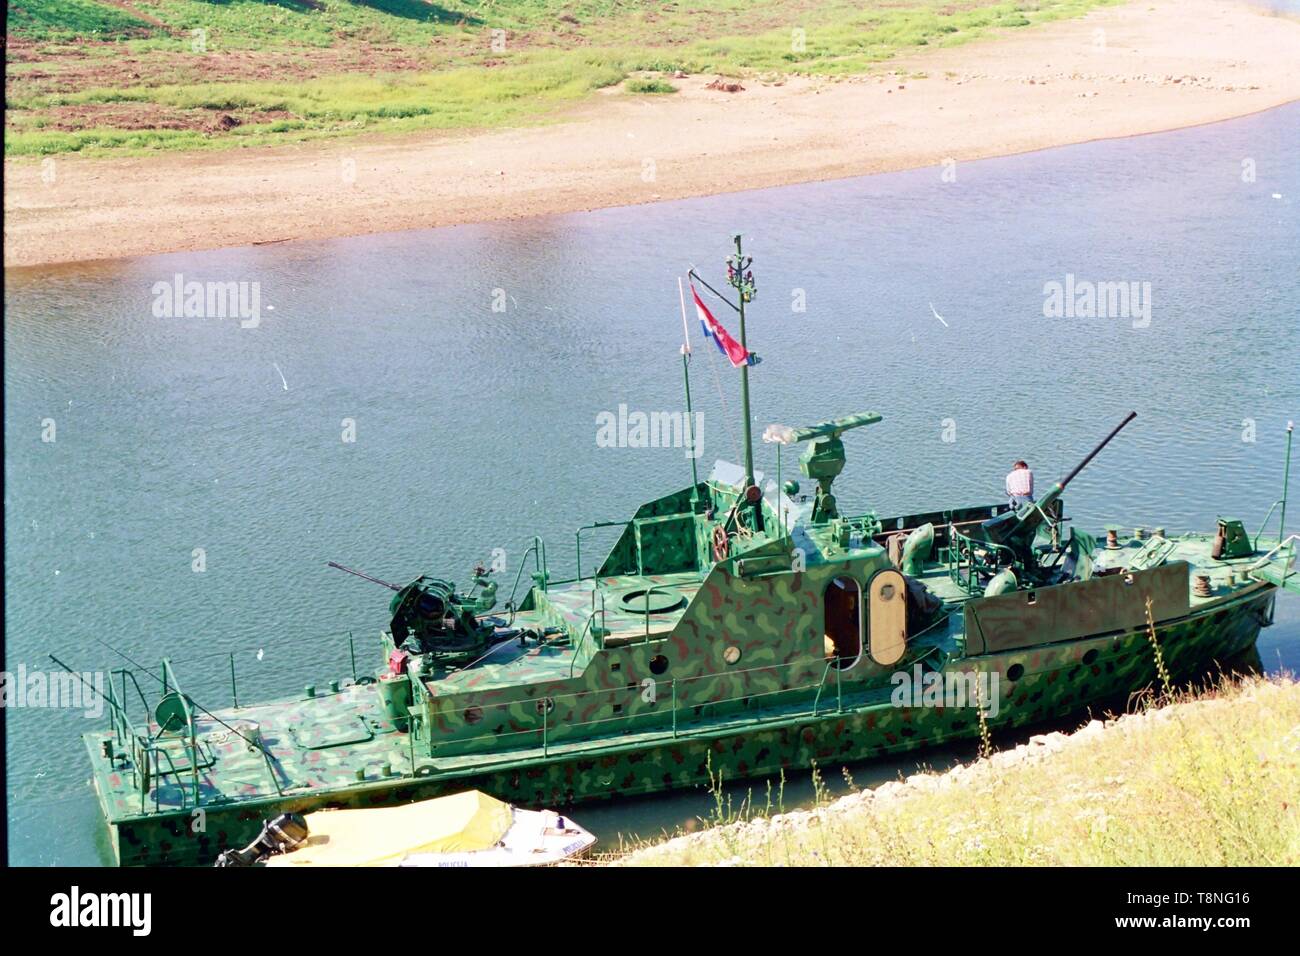 A Croatian Defence Forces patrol boat sat on the river flowing through Osijek during the conflict between Serbia and Croatia in 1991-92. Picture by Adam Alexander Stock Photo